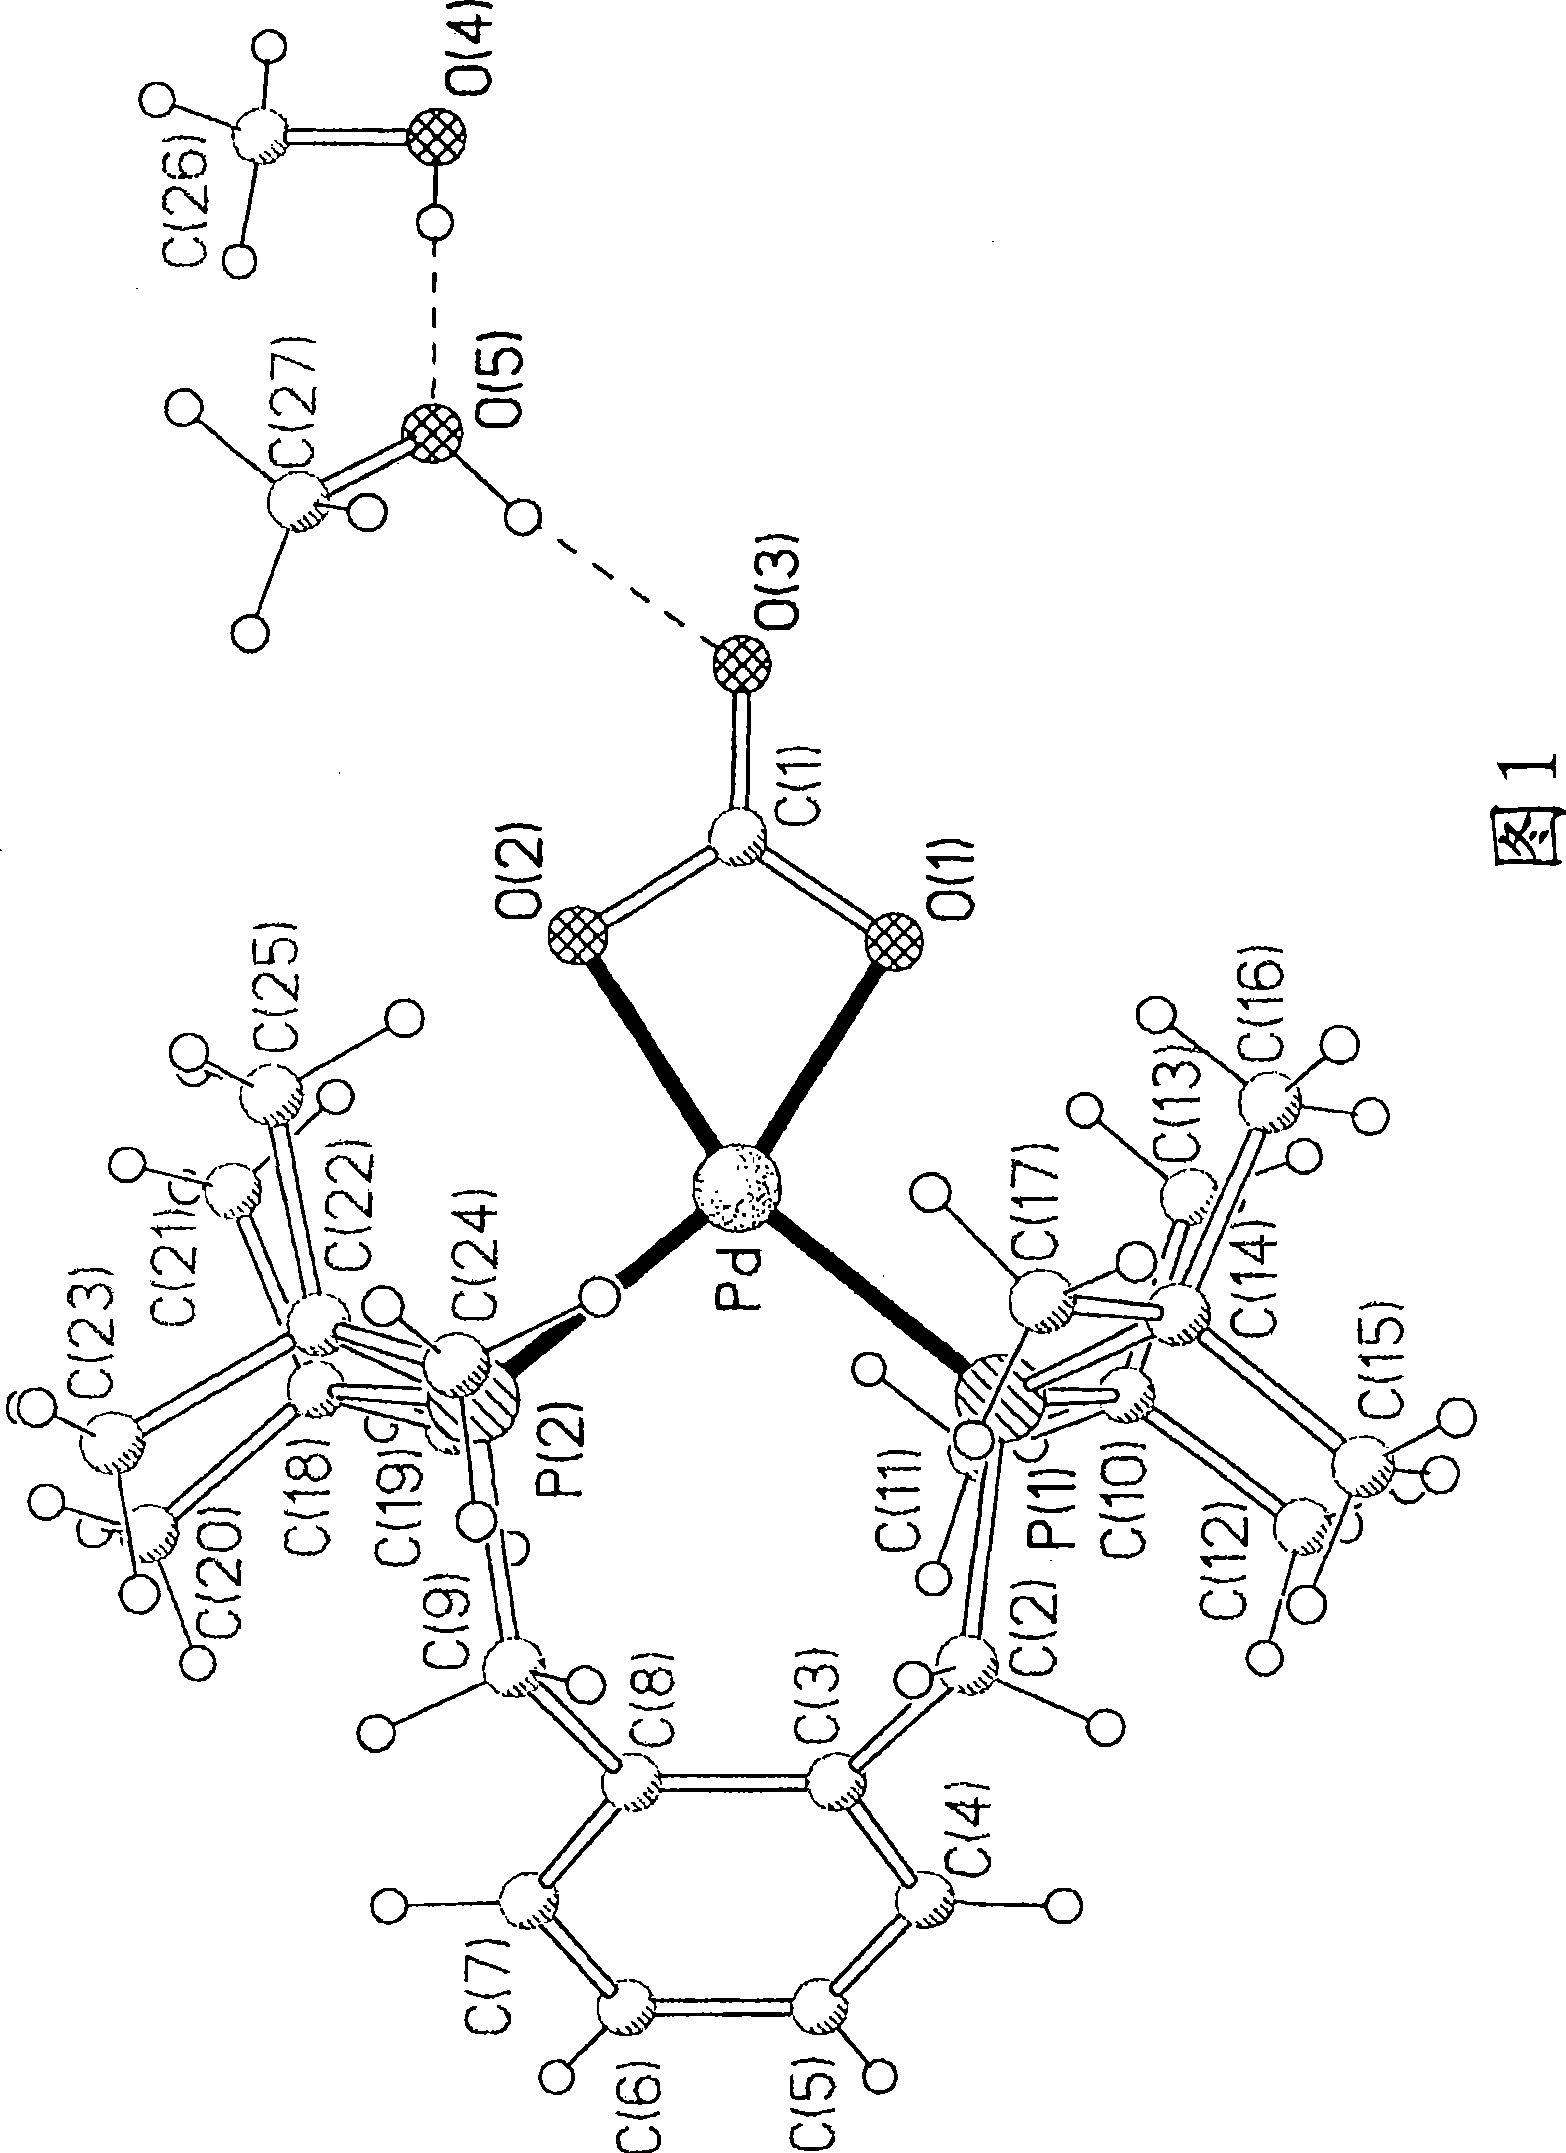 Metal complexes for use in the carbonylation of ethylenically unsaturated compounds